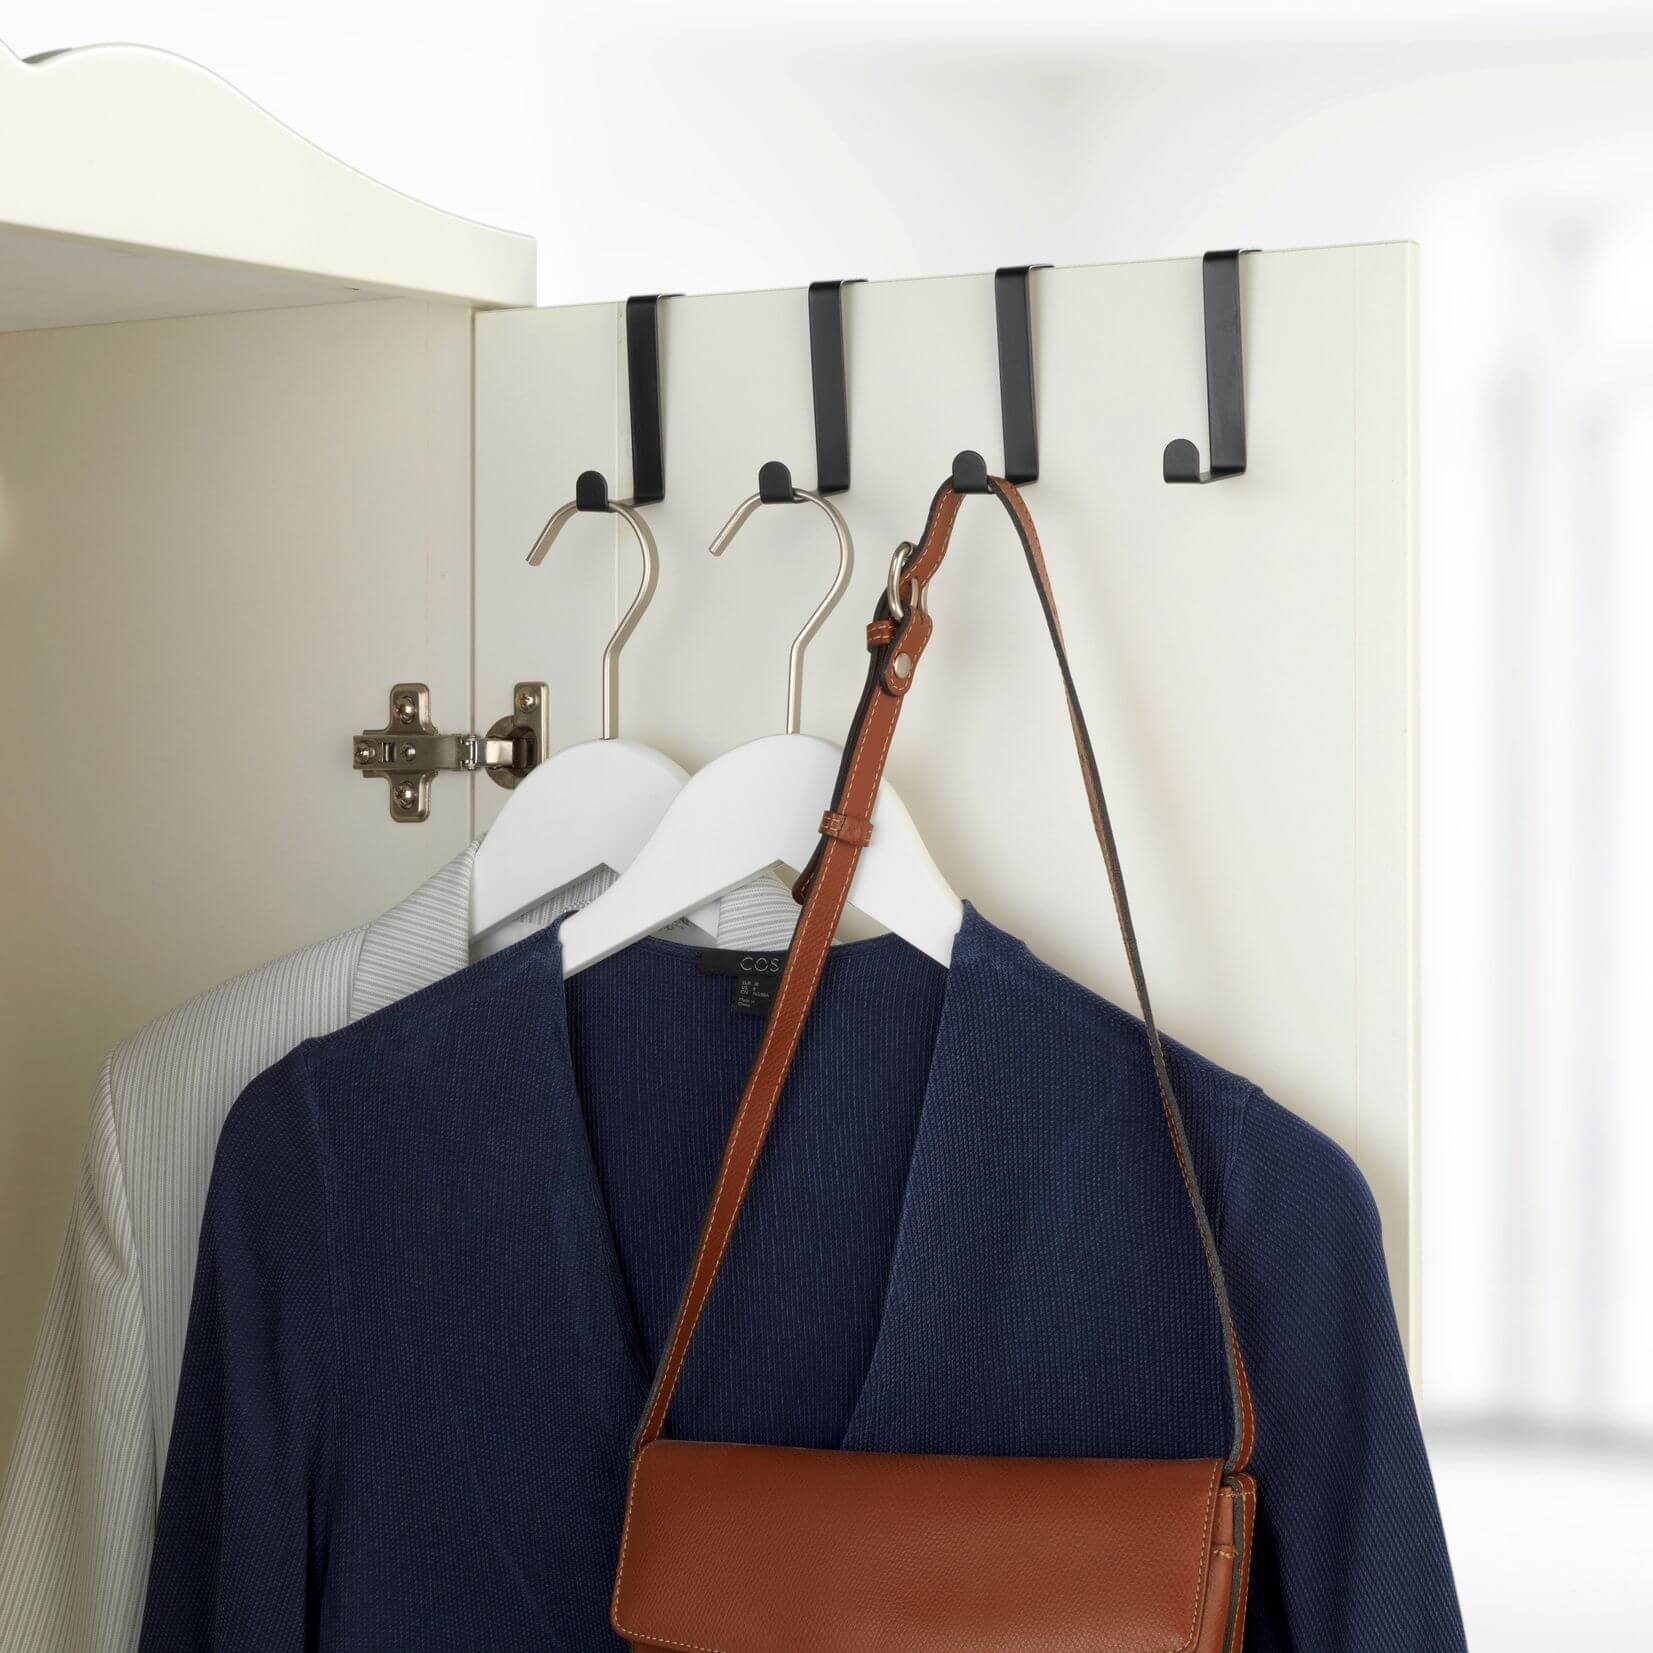 Four black over the door storage hooks holding a handbag and jumpers